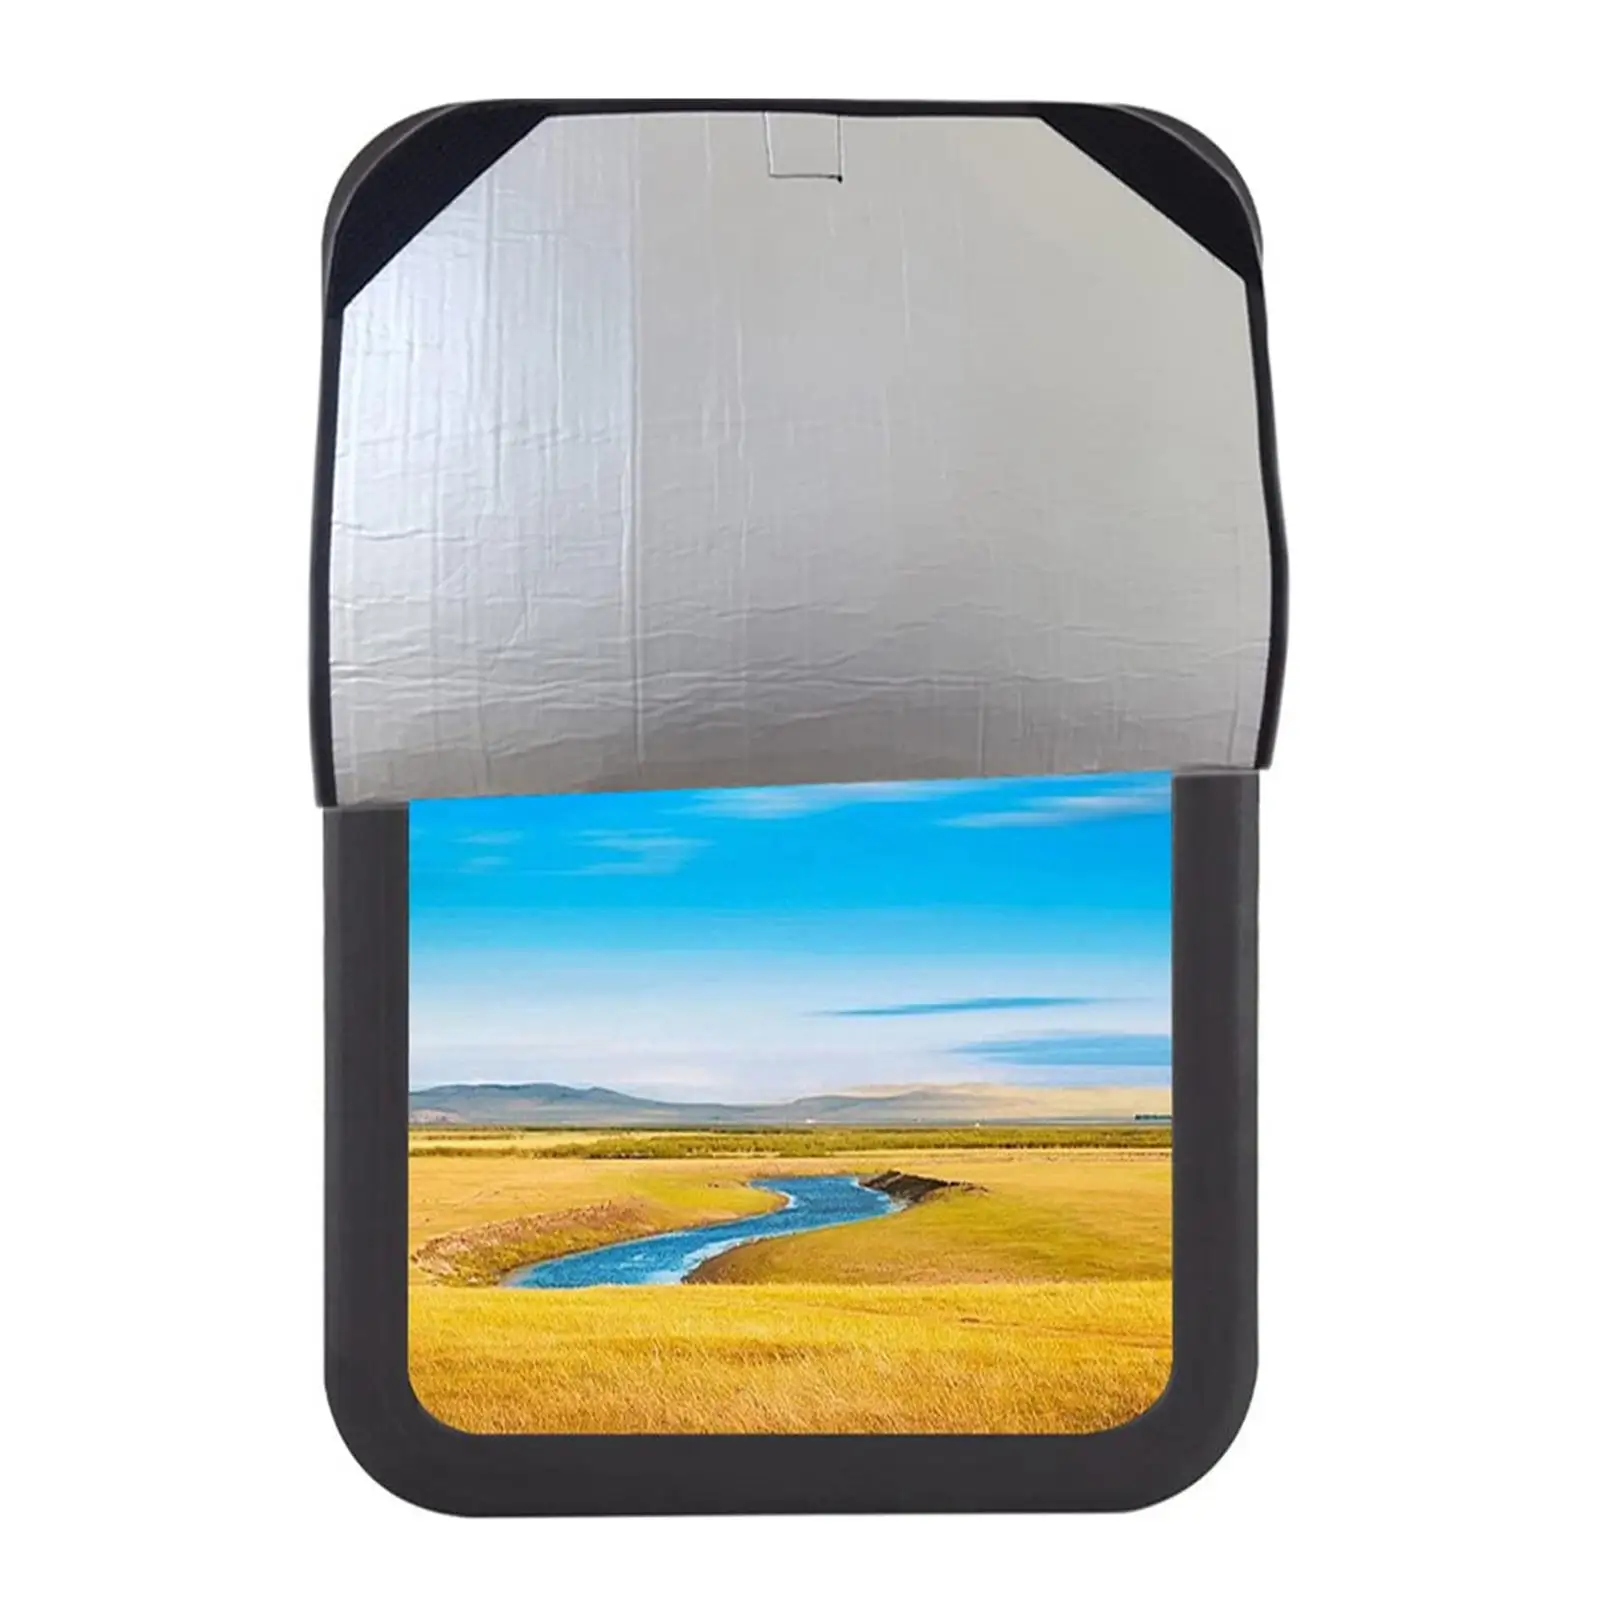 RV Door Window Shade Cover Window Heat Insulation Curtain Car Accessories for Camper Privacy Entrance Travel Trailer Camper